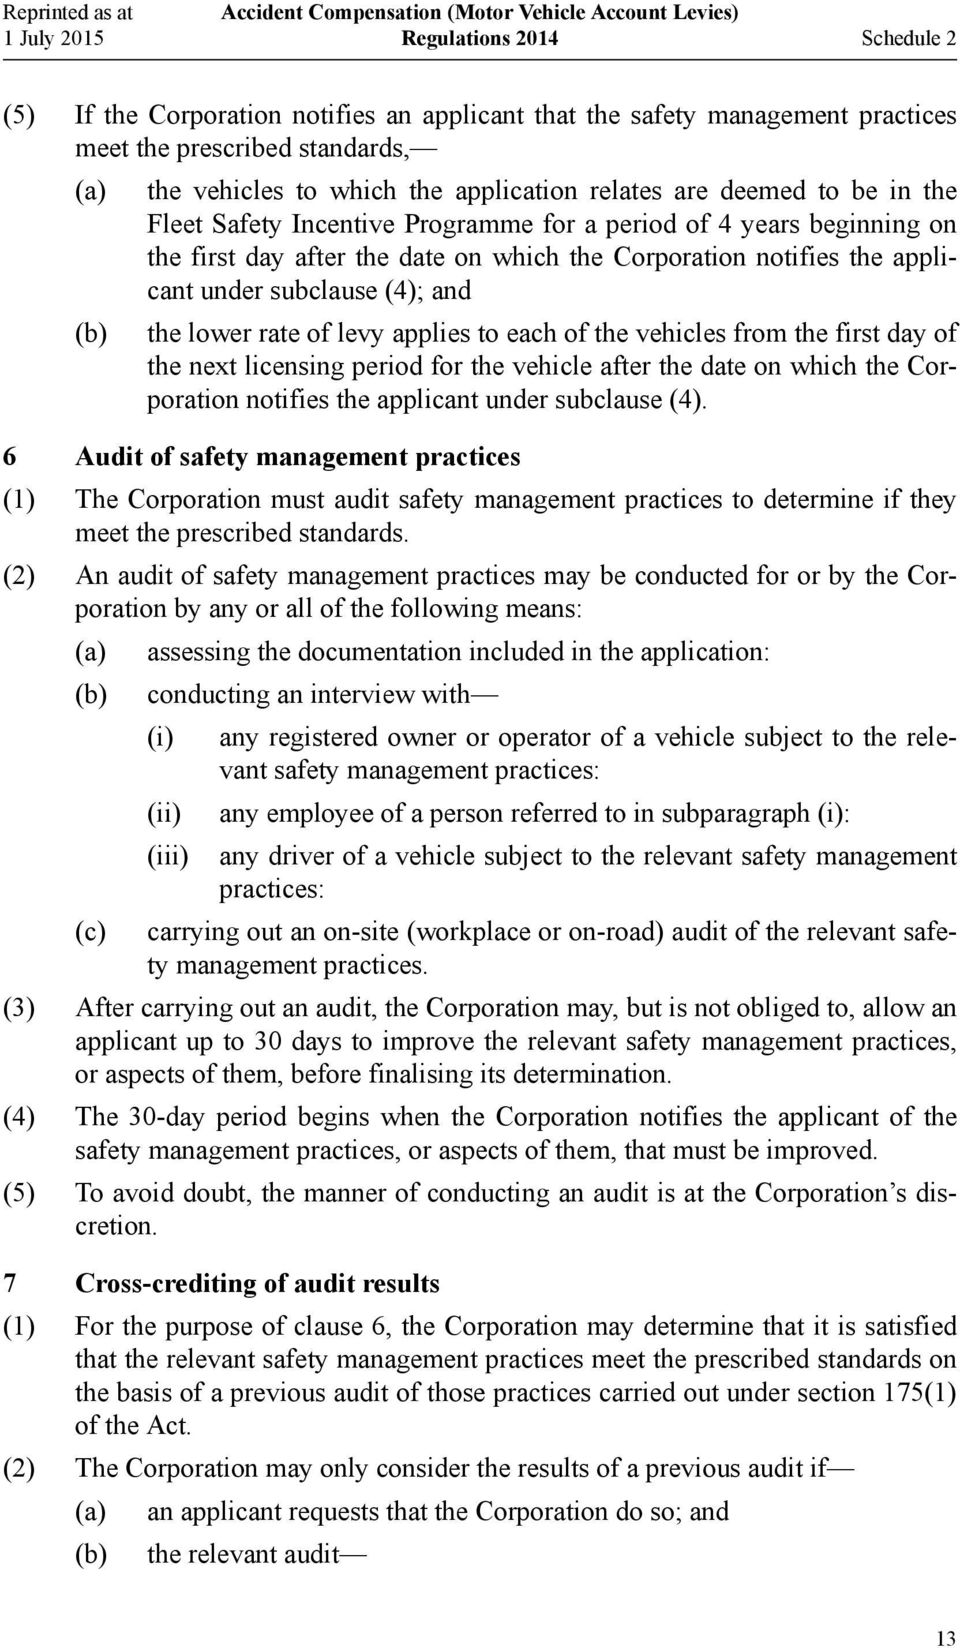 levy applies to each of the vehicles from the first day of the next licensing period for the vehicle after the date on which the Corporation notifies the applicant under subclause (4).